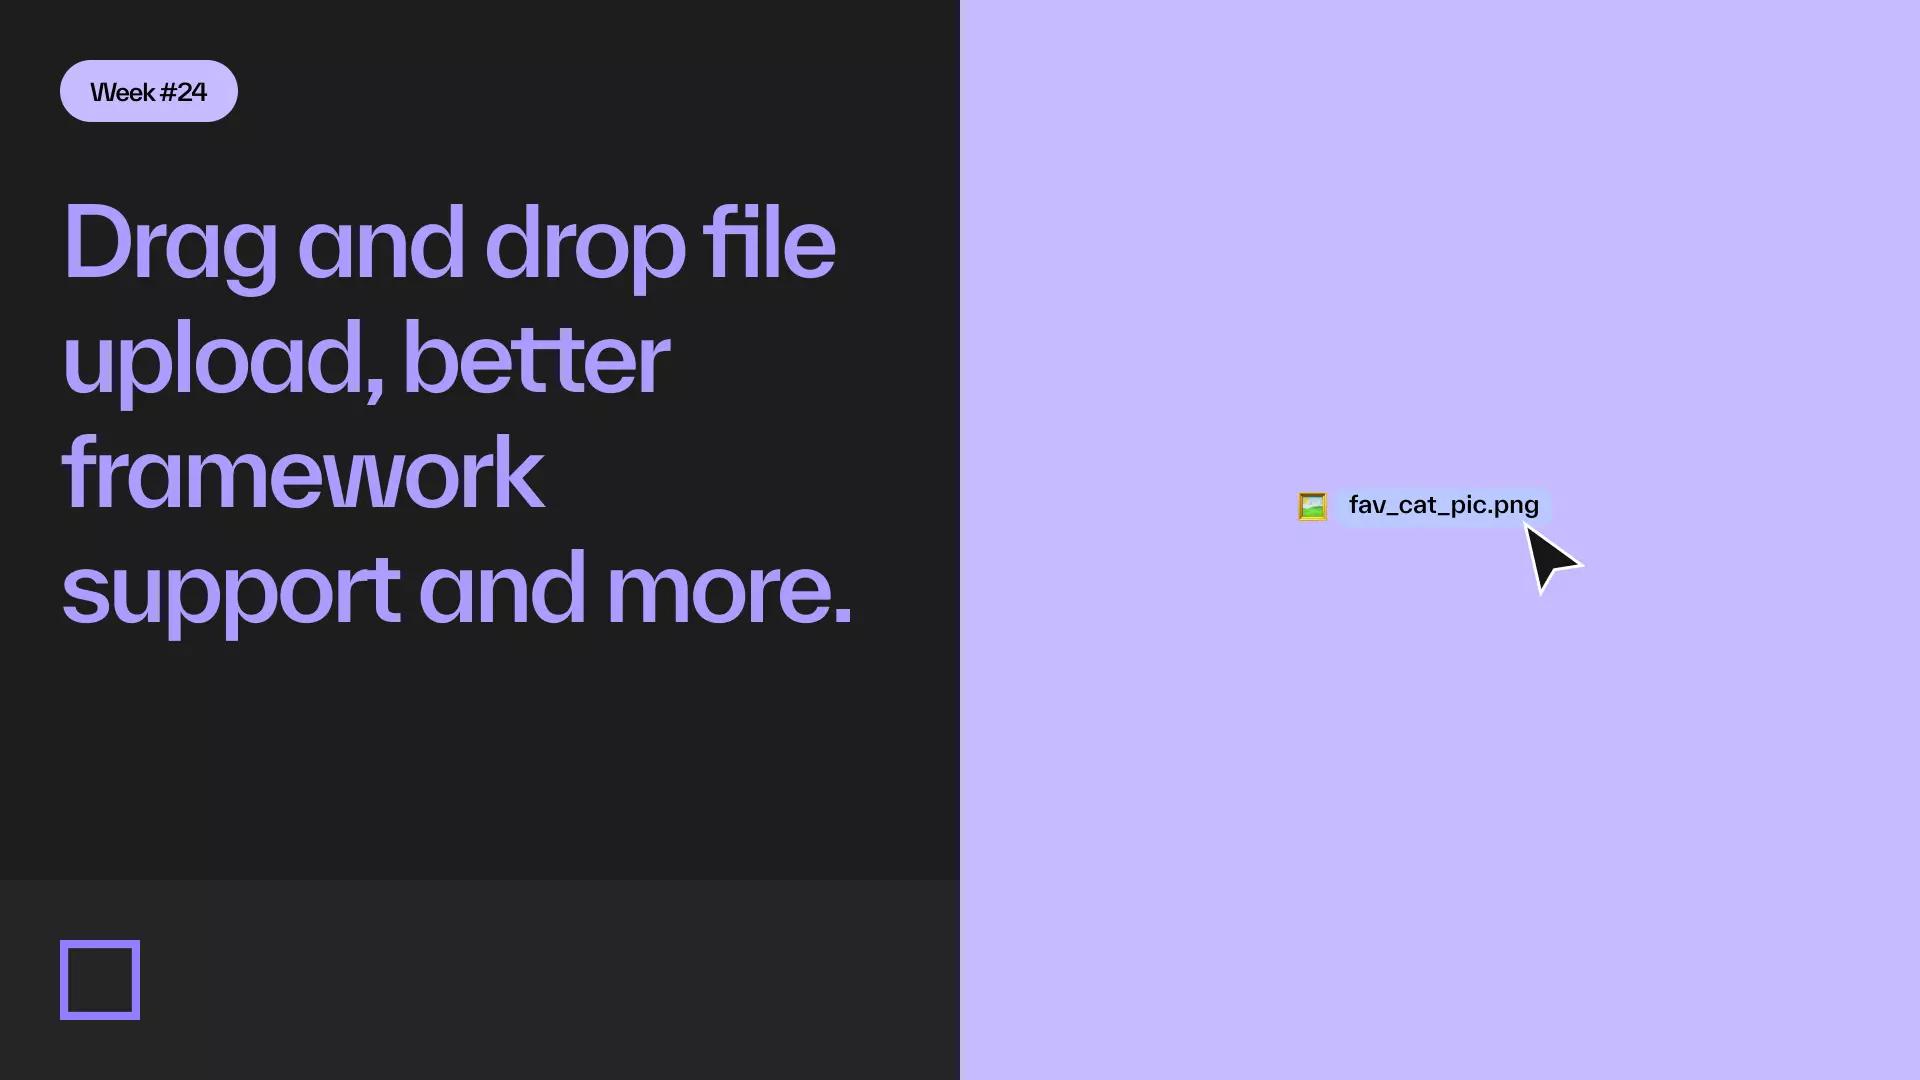 Drag and drop file upload, better framework support and more.